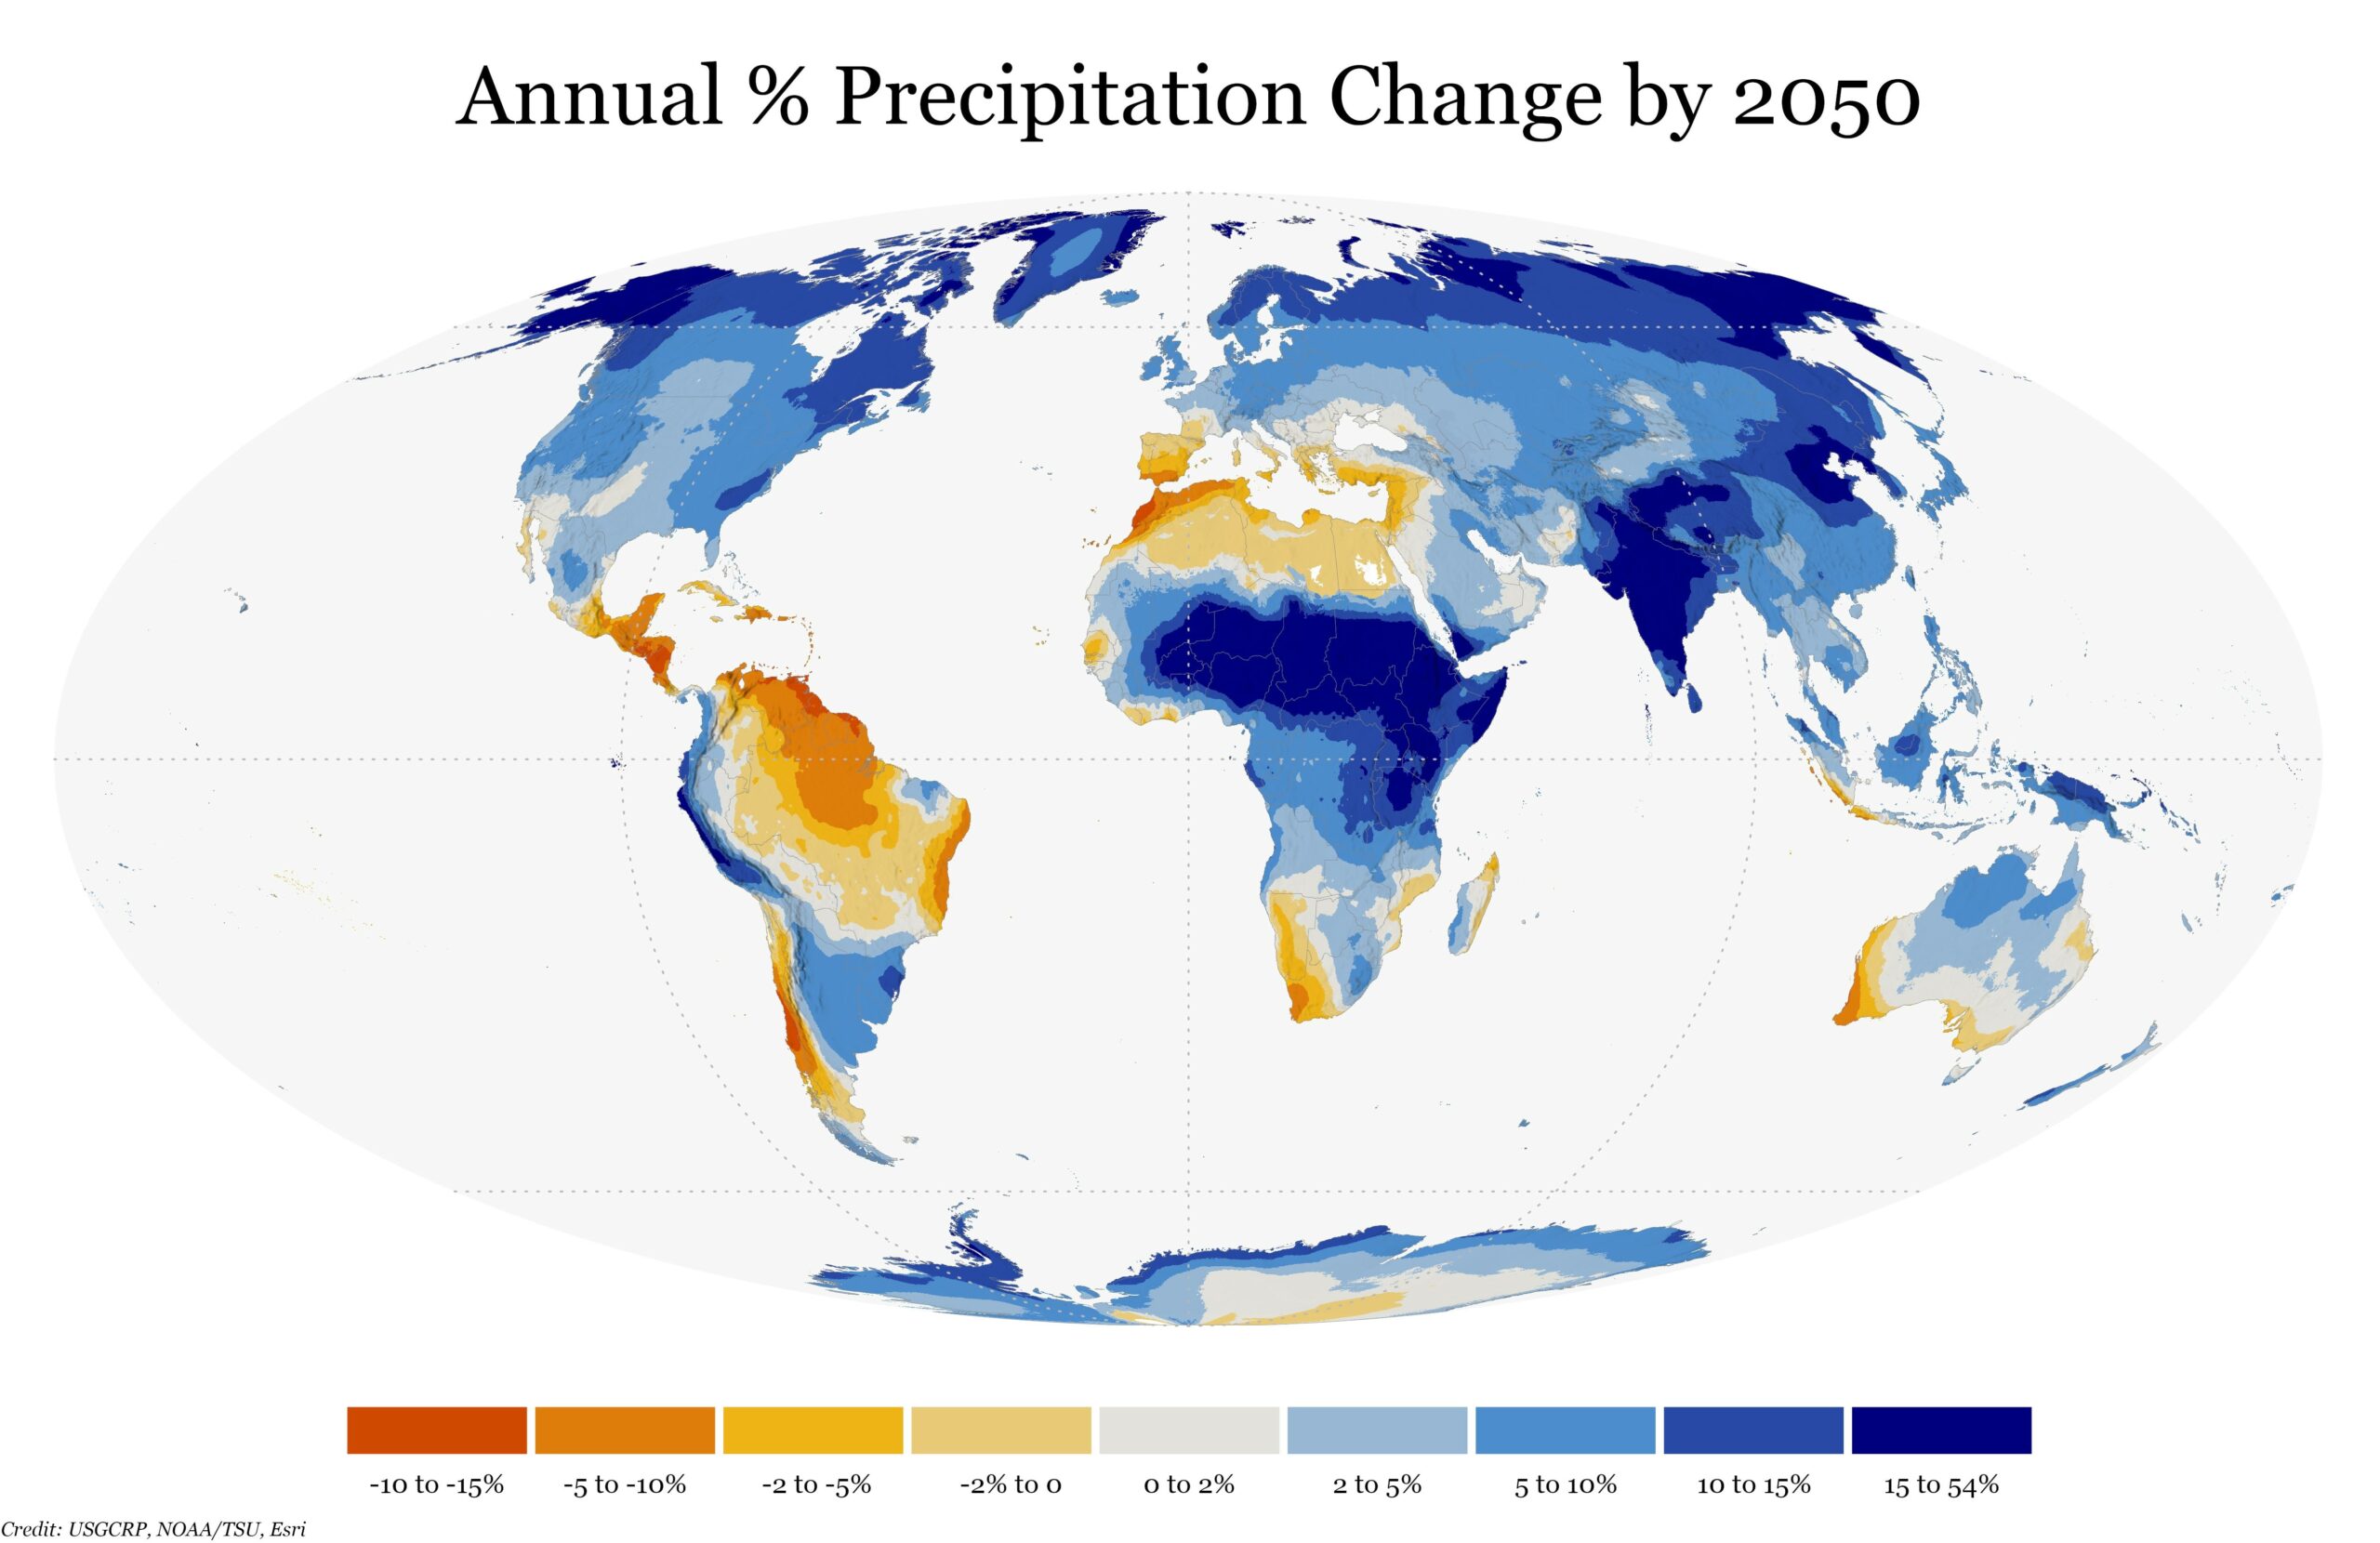 By mid-century, annual precipitation could increase significantly across most of the world. Looking at percent change against the historic baseline can show where future climate could differ most from typical, current patterns and is therefore a good indicator of the biggest shifts and greatest need for preparedness.